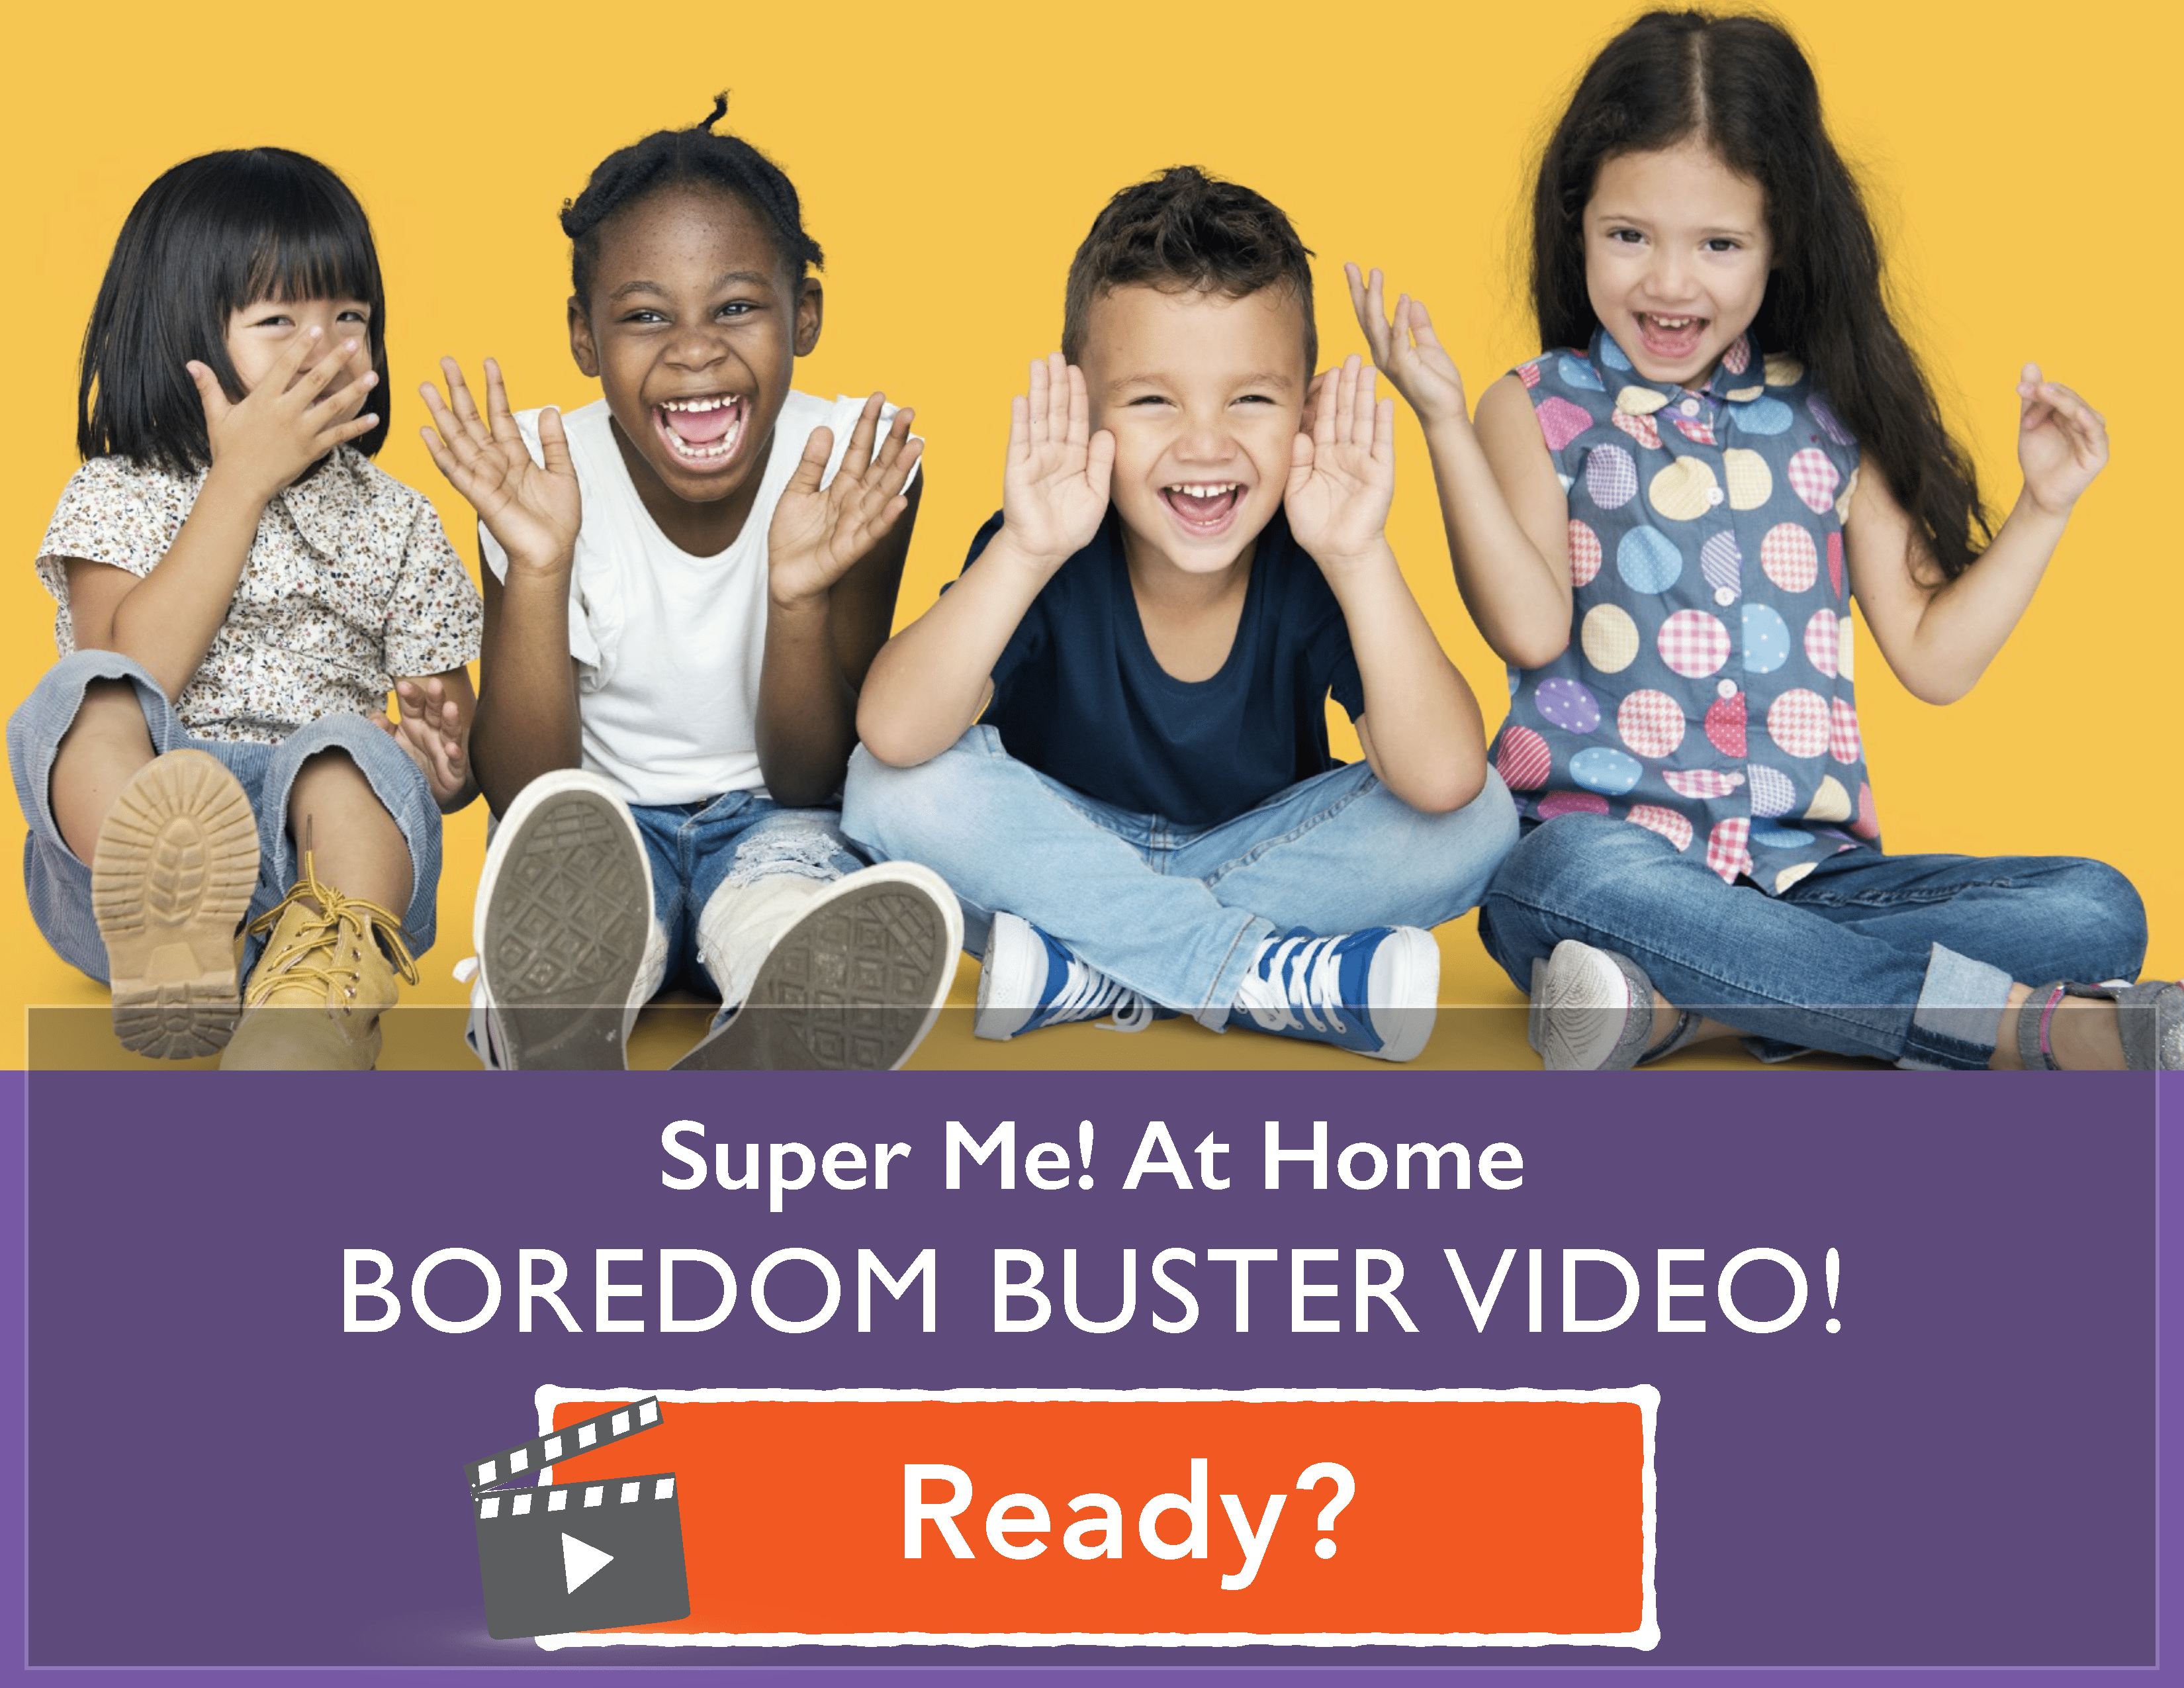 Super Me! at Home Boredom Buster